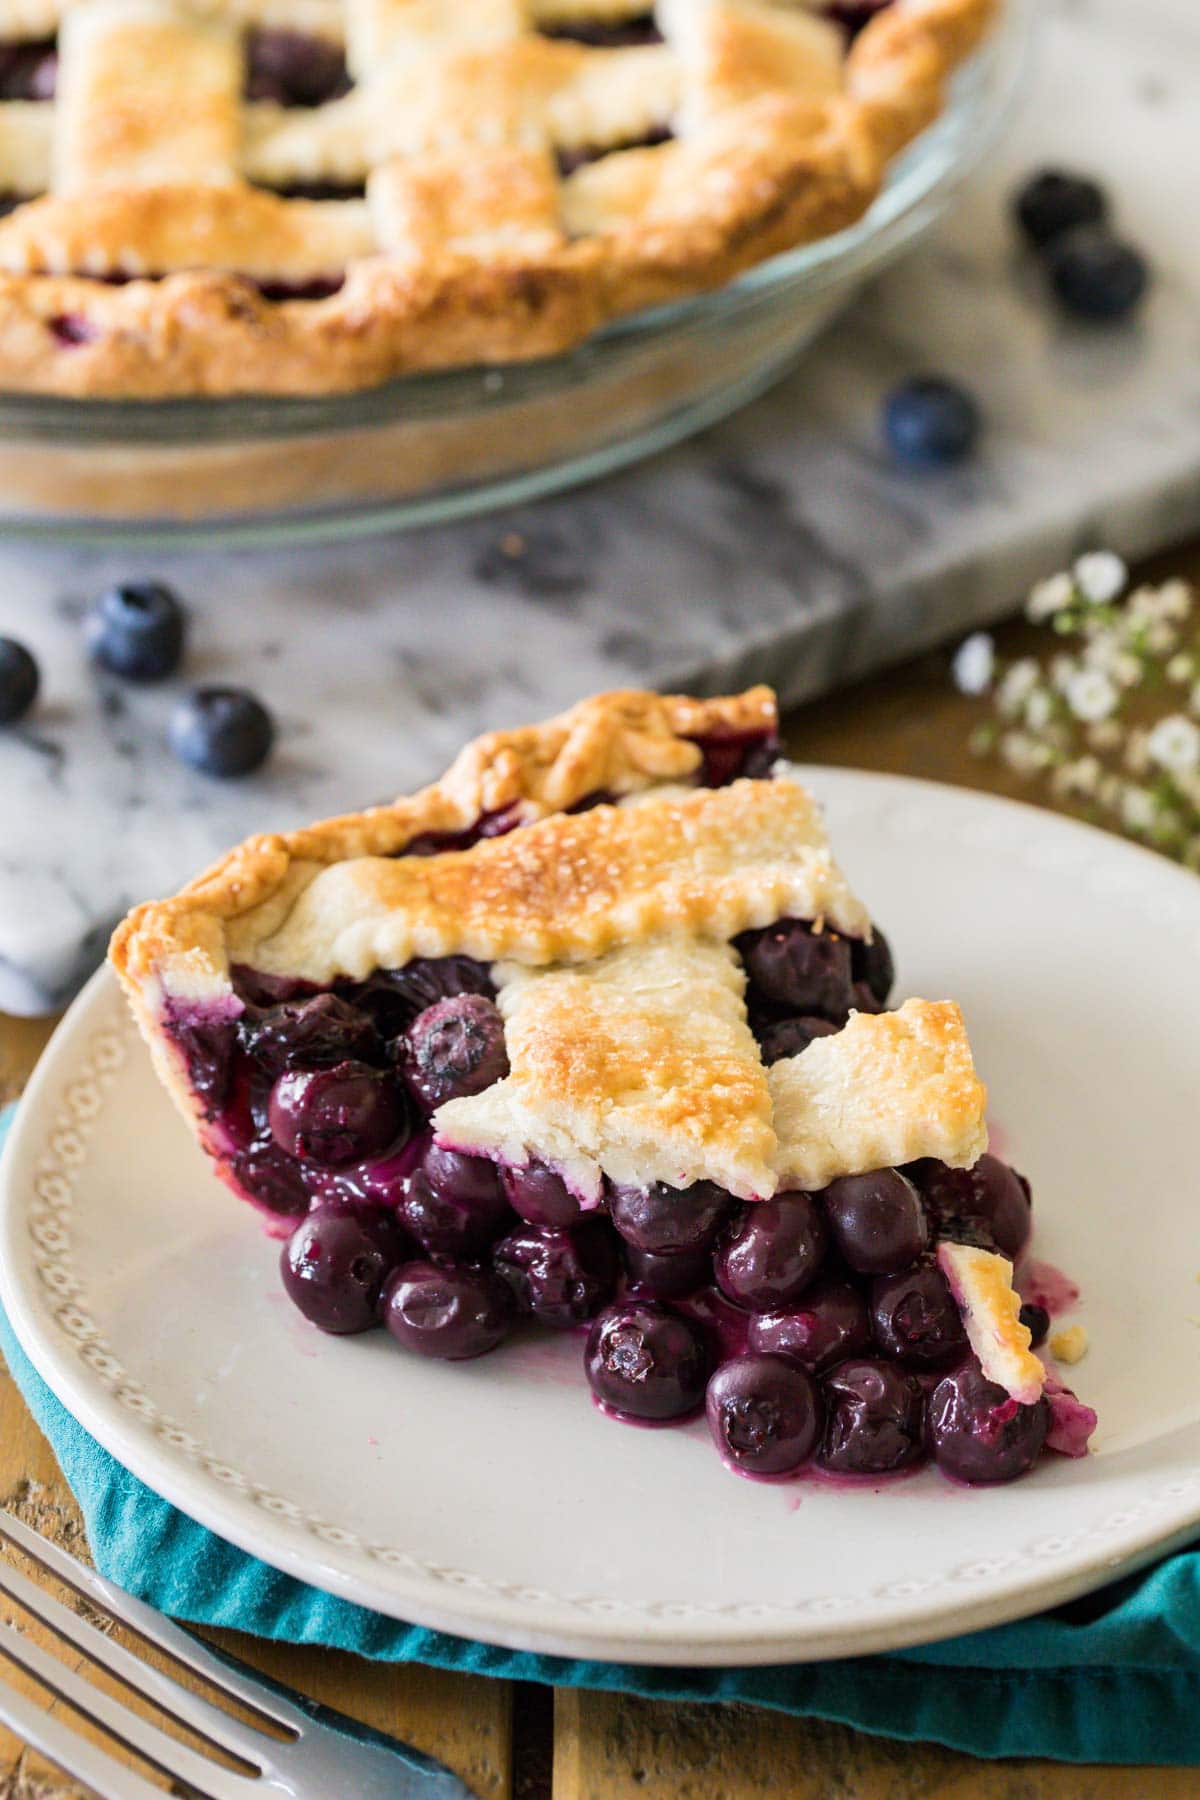 Slice of blueberry pie with a lattice crust on a white plate.